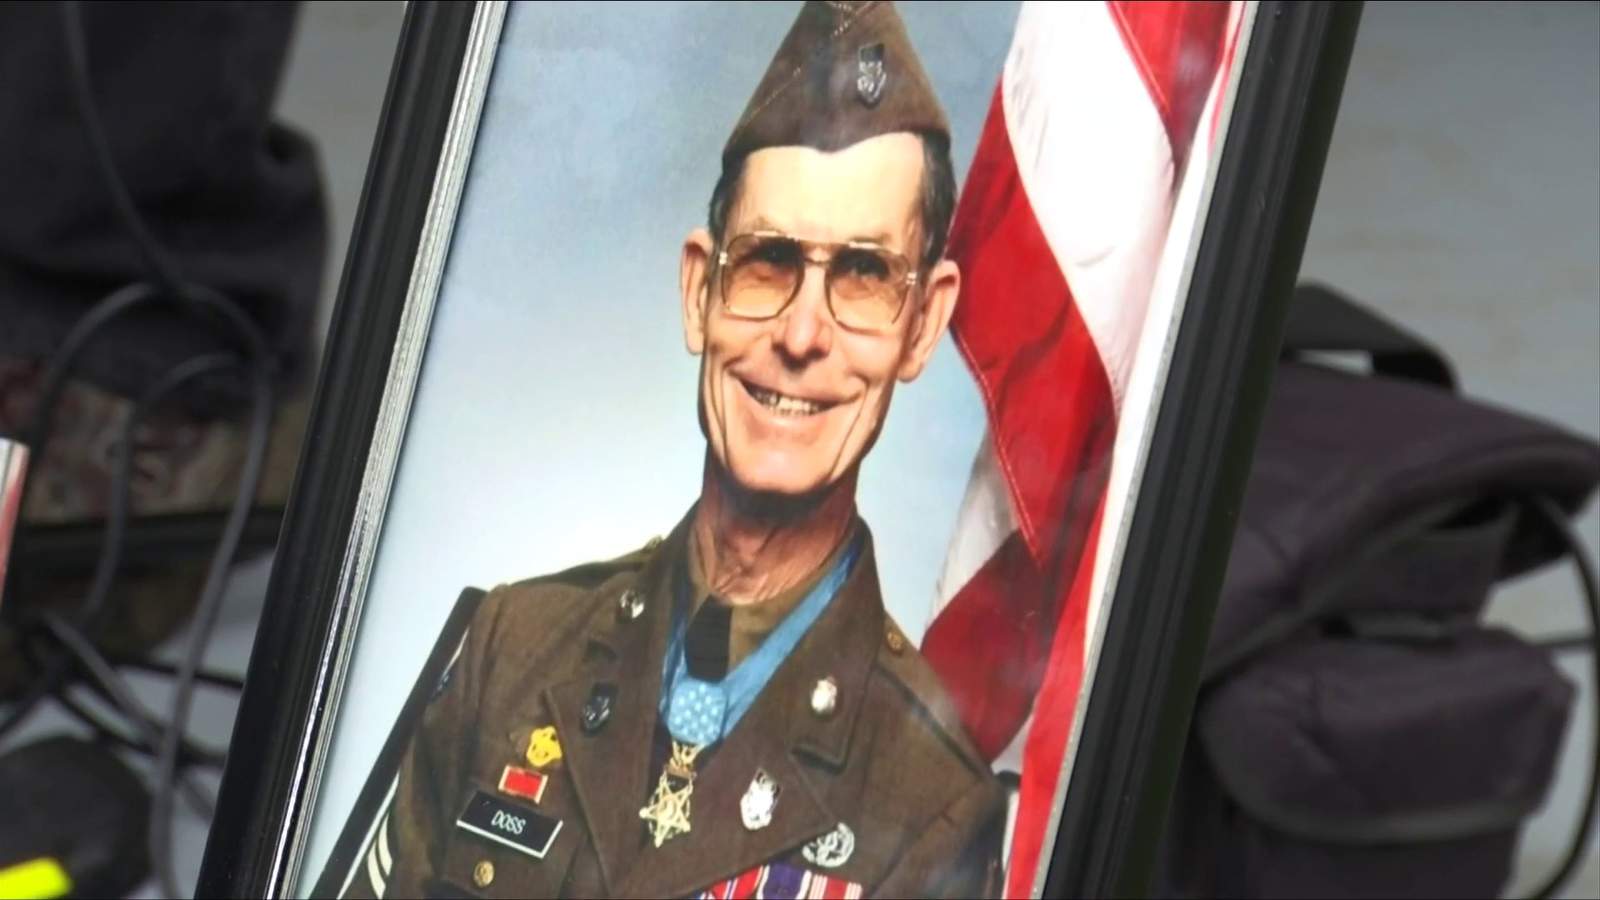 'He healed people’: Lynchburg honors veteran 75 years after he received Medal of Honor